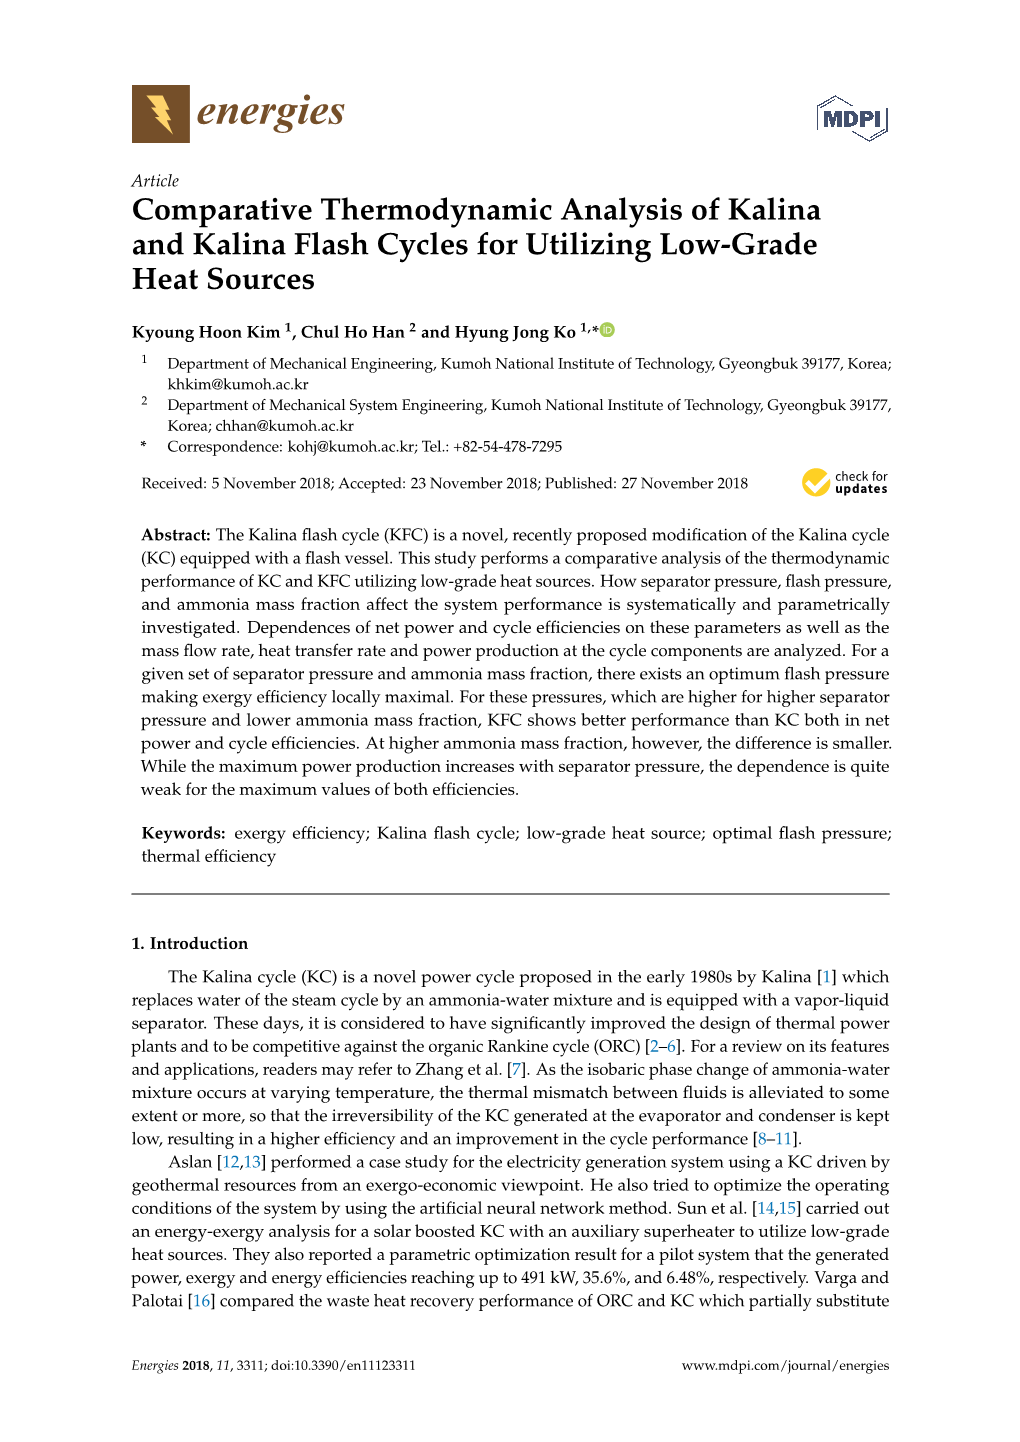 Comparative Thermodynamic Analysis of Kalina and Kalina Flash Cycles for Utilizing Low-Grade Heat Sources